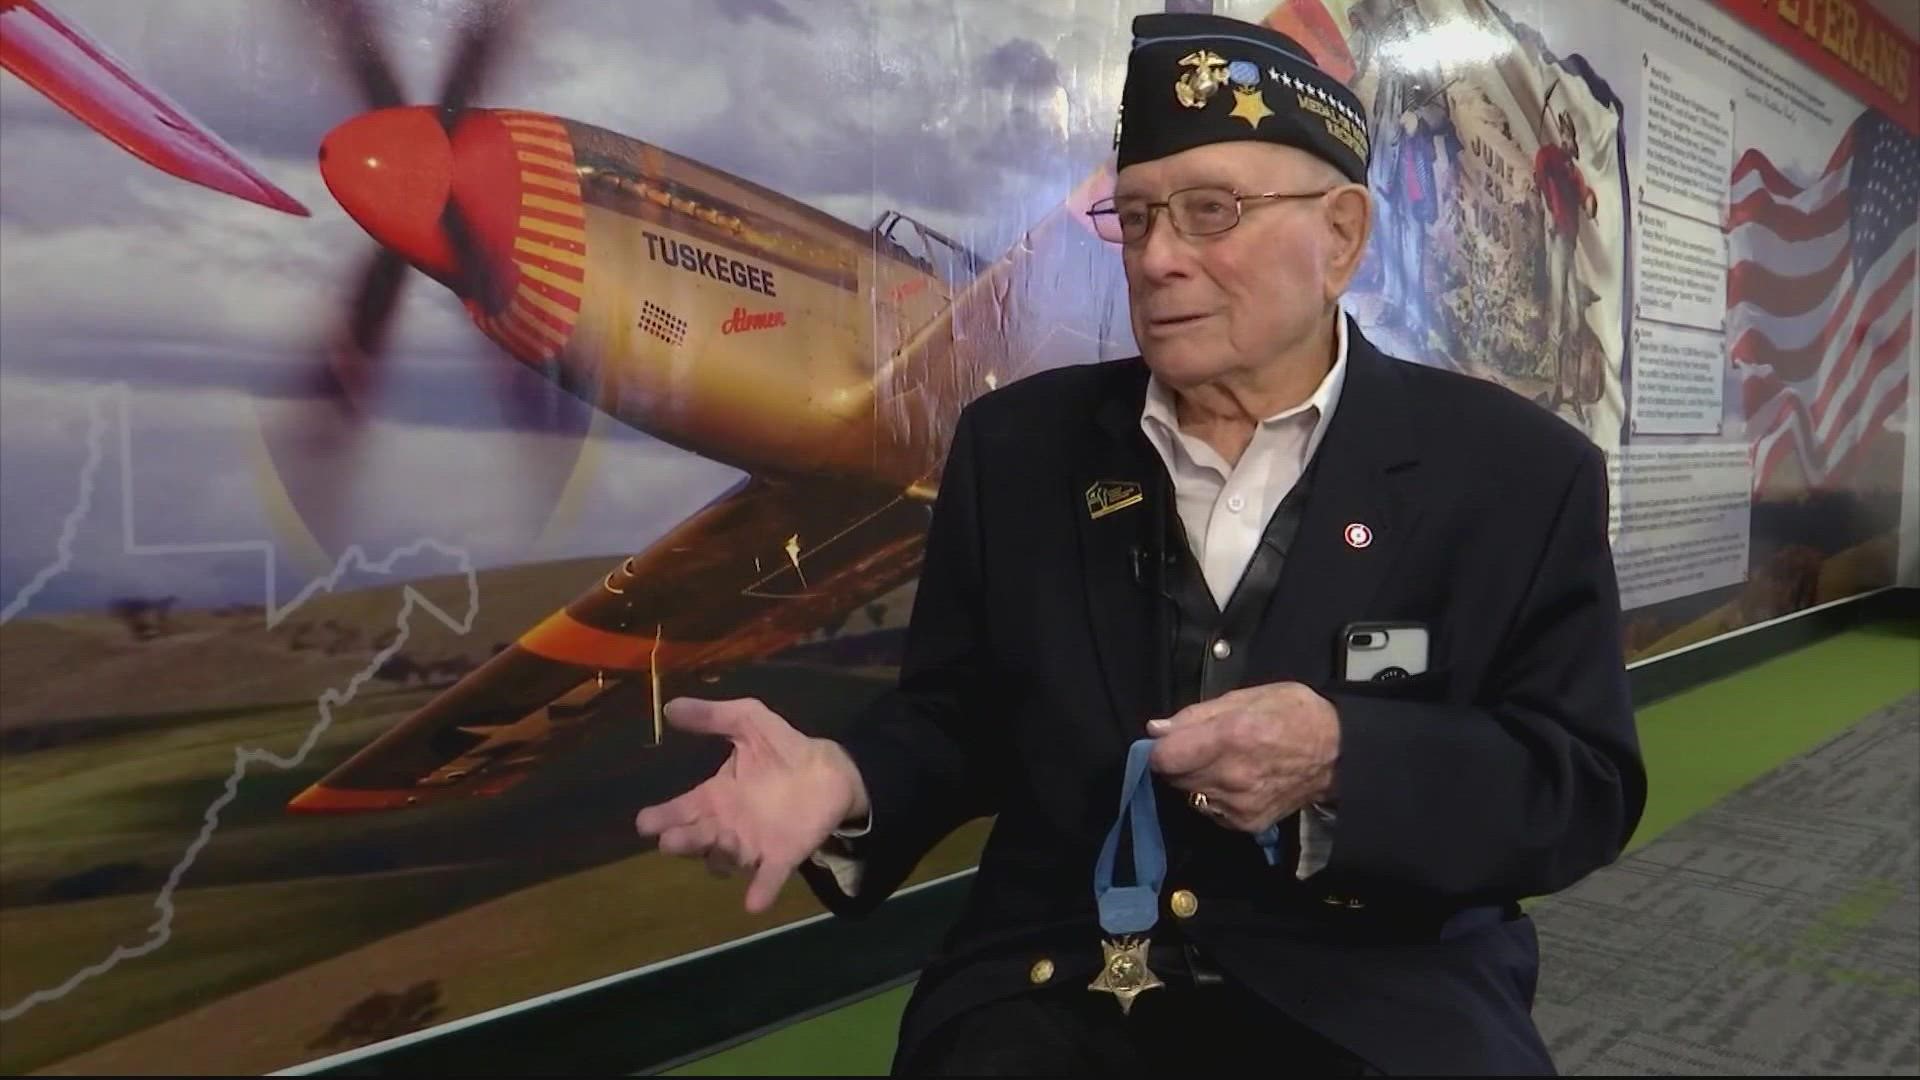 Williams was the last surviving World War II Medal of Honor recipient.